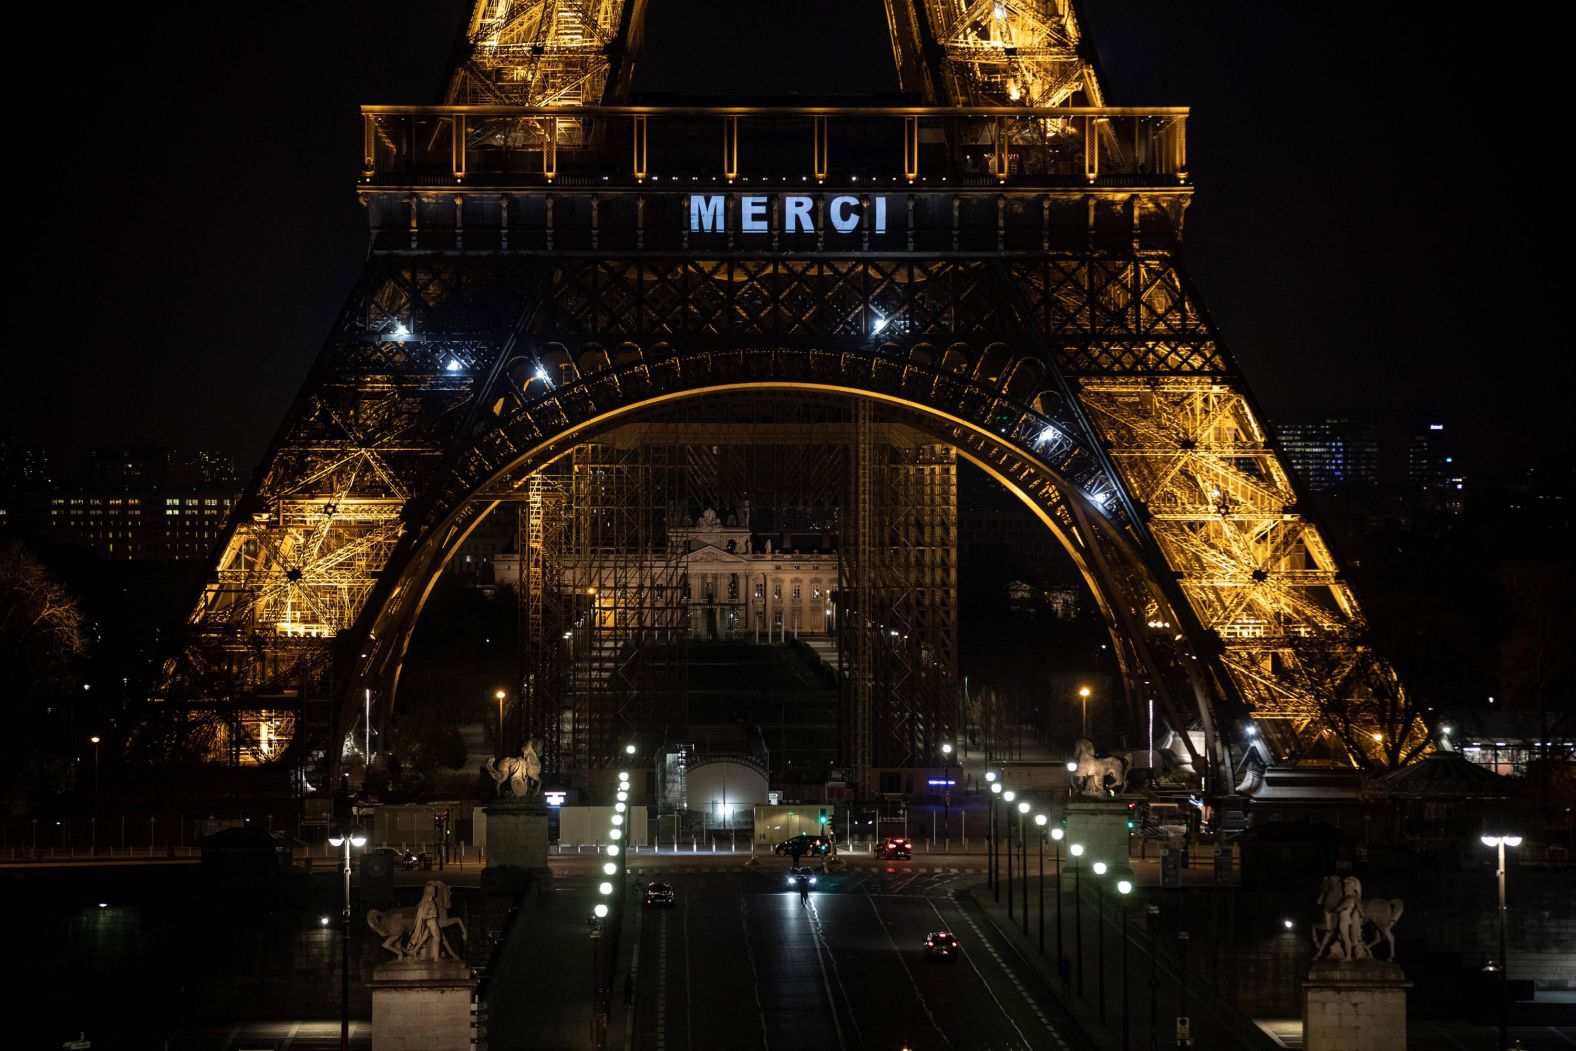 The word "merci" (thank you) is displayed on the Eiffel Tower in Paris as a tribute to essential workers on March 27.